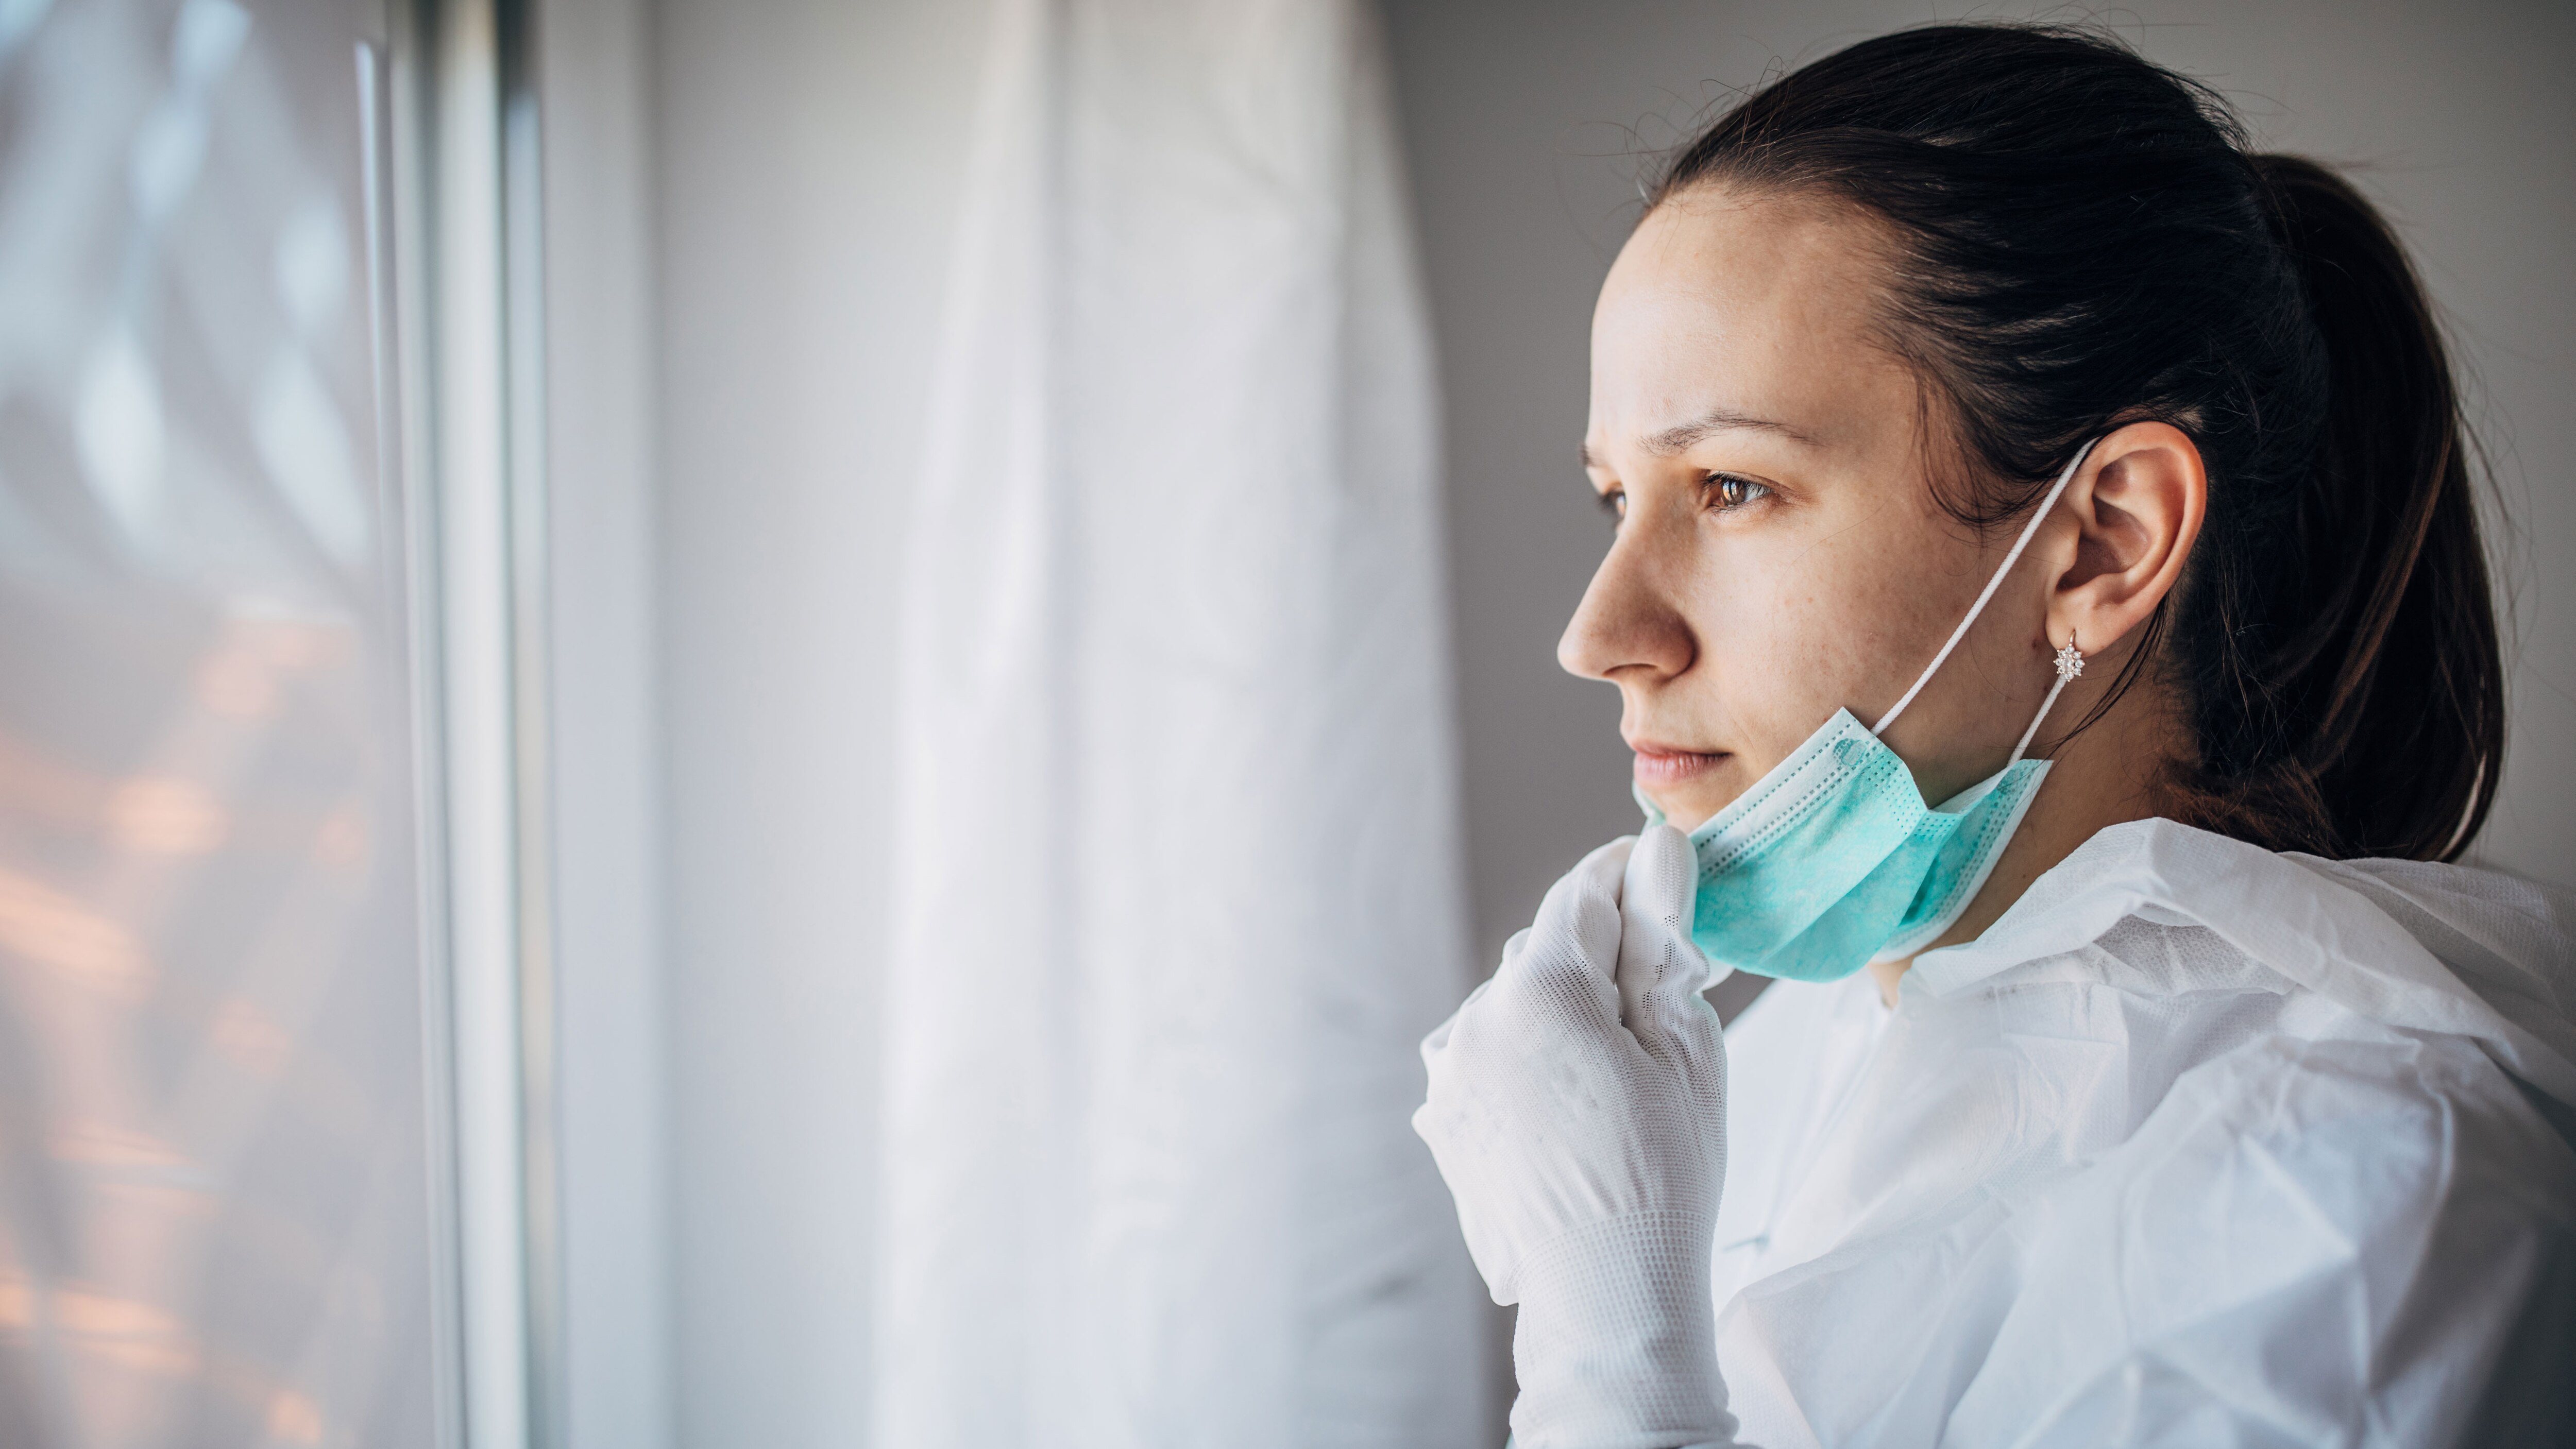 A health care worker, wearing PPE, stares out the window.